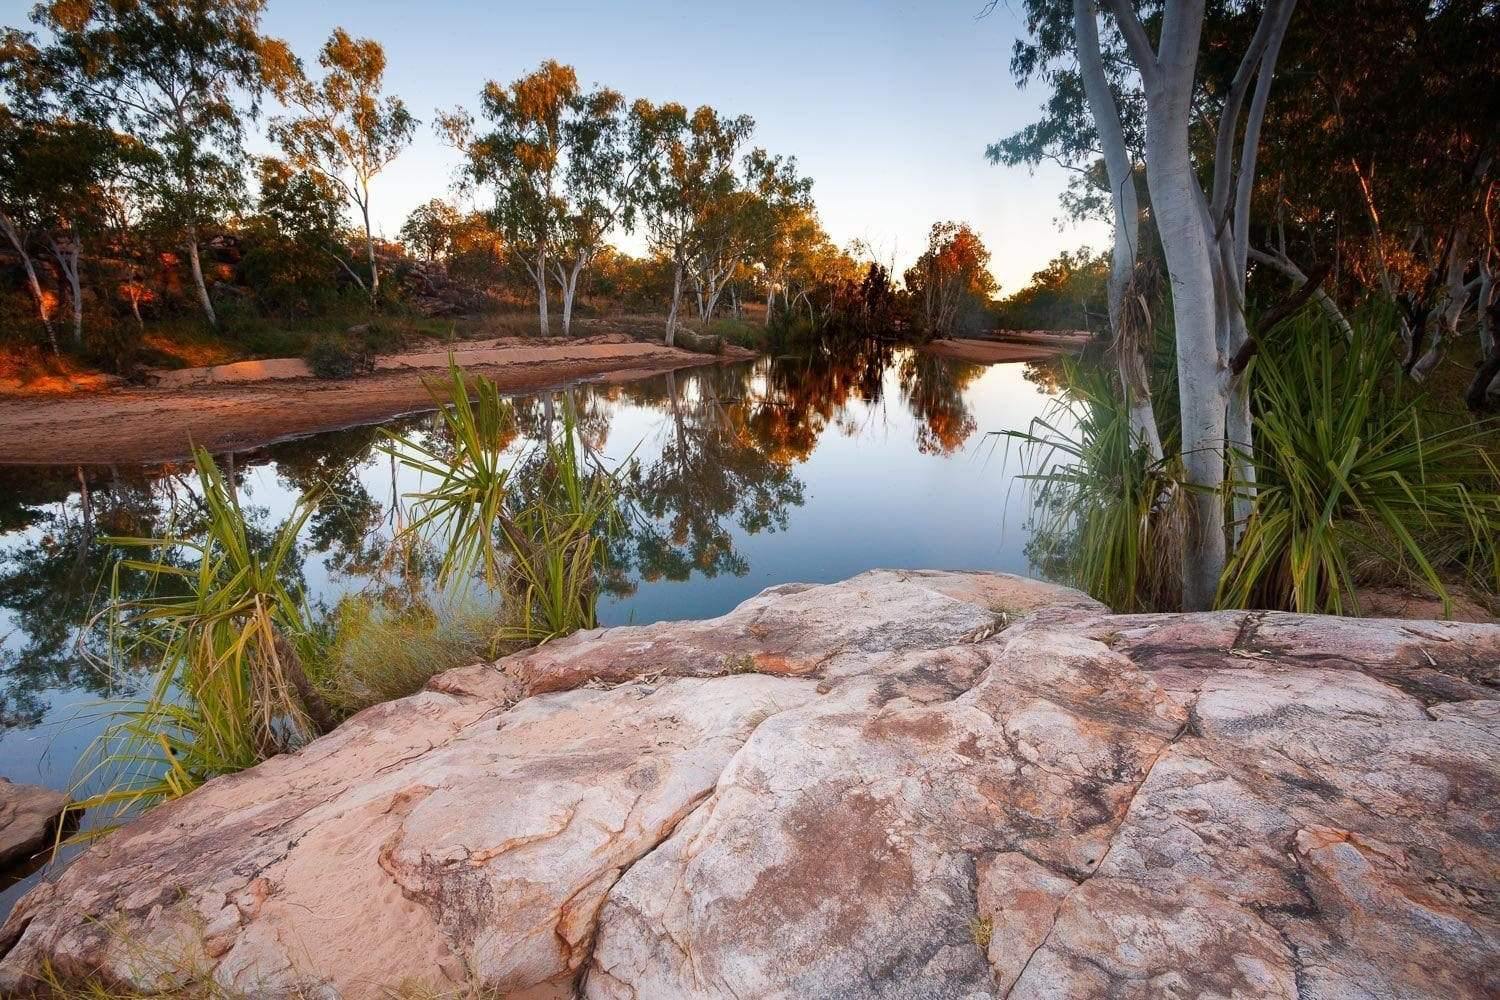 A watercourse with a row of trees and some mountain stones around, Gibb River Artwork- The Kimberley WA